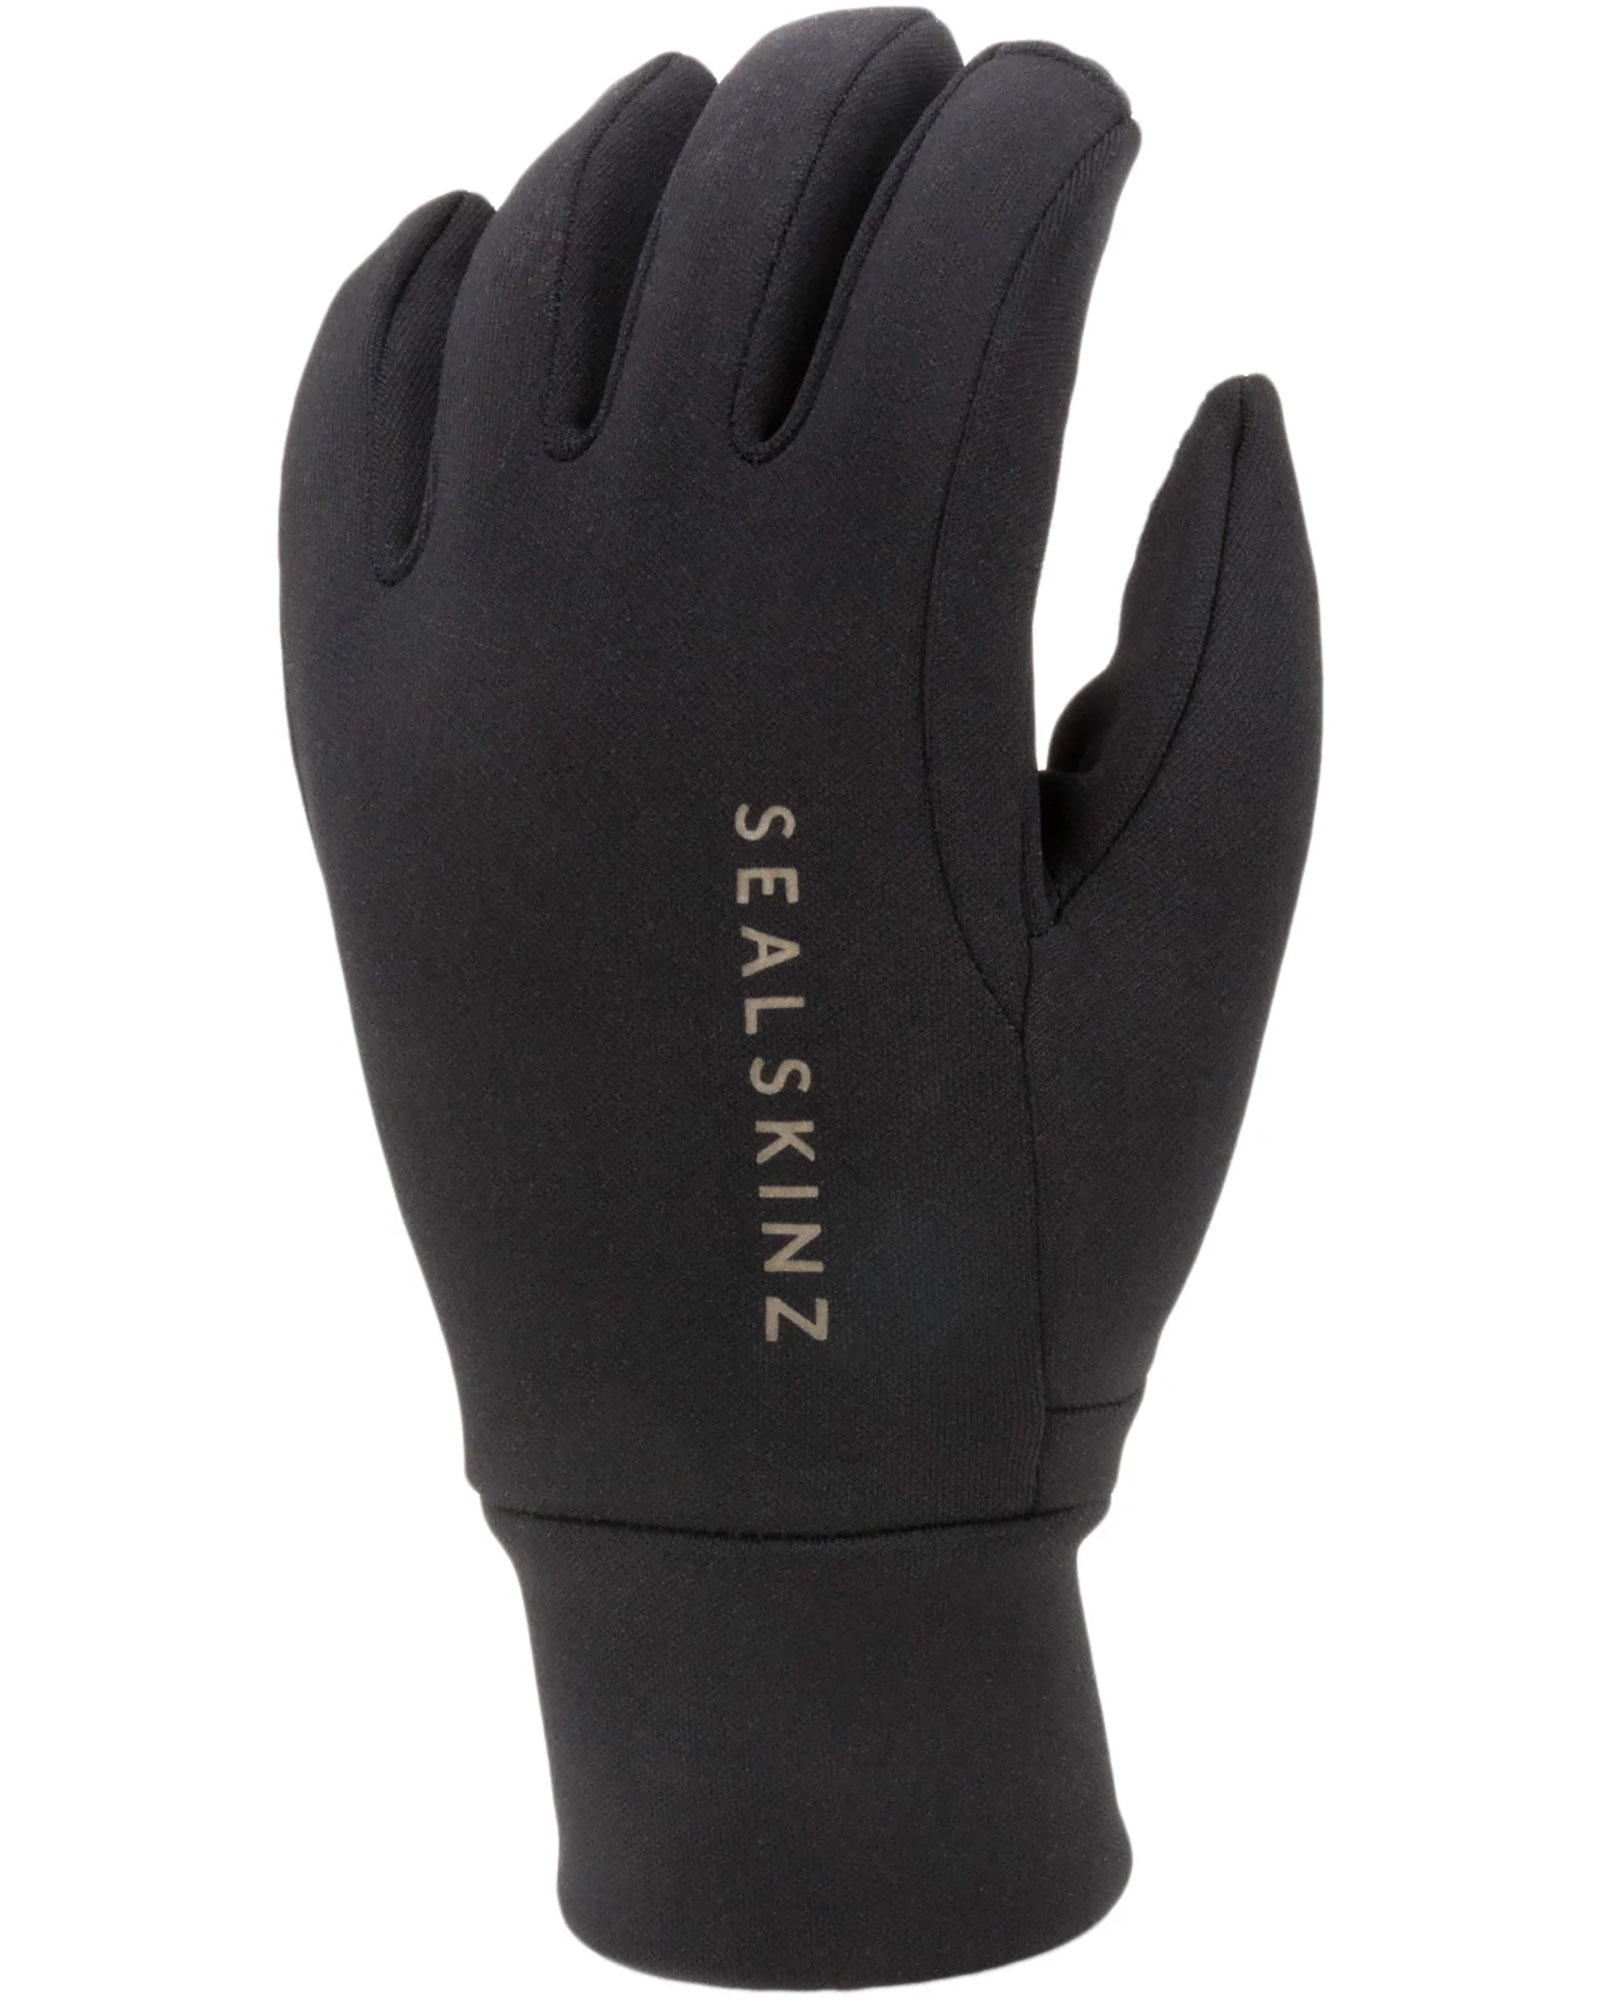 SealSkinz Water Repellant All Weather Gloves - black L